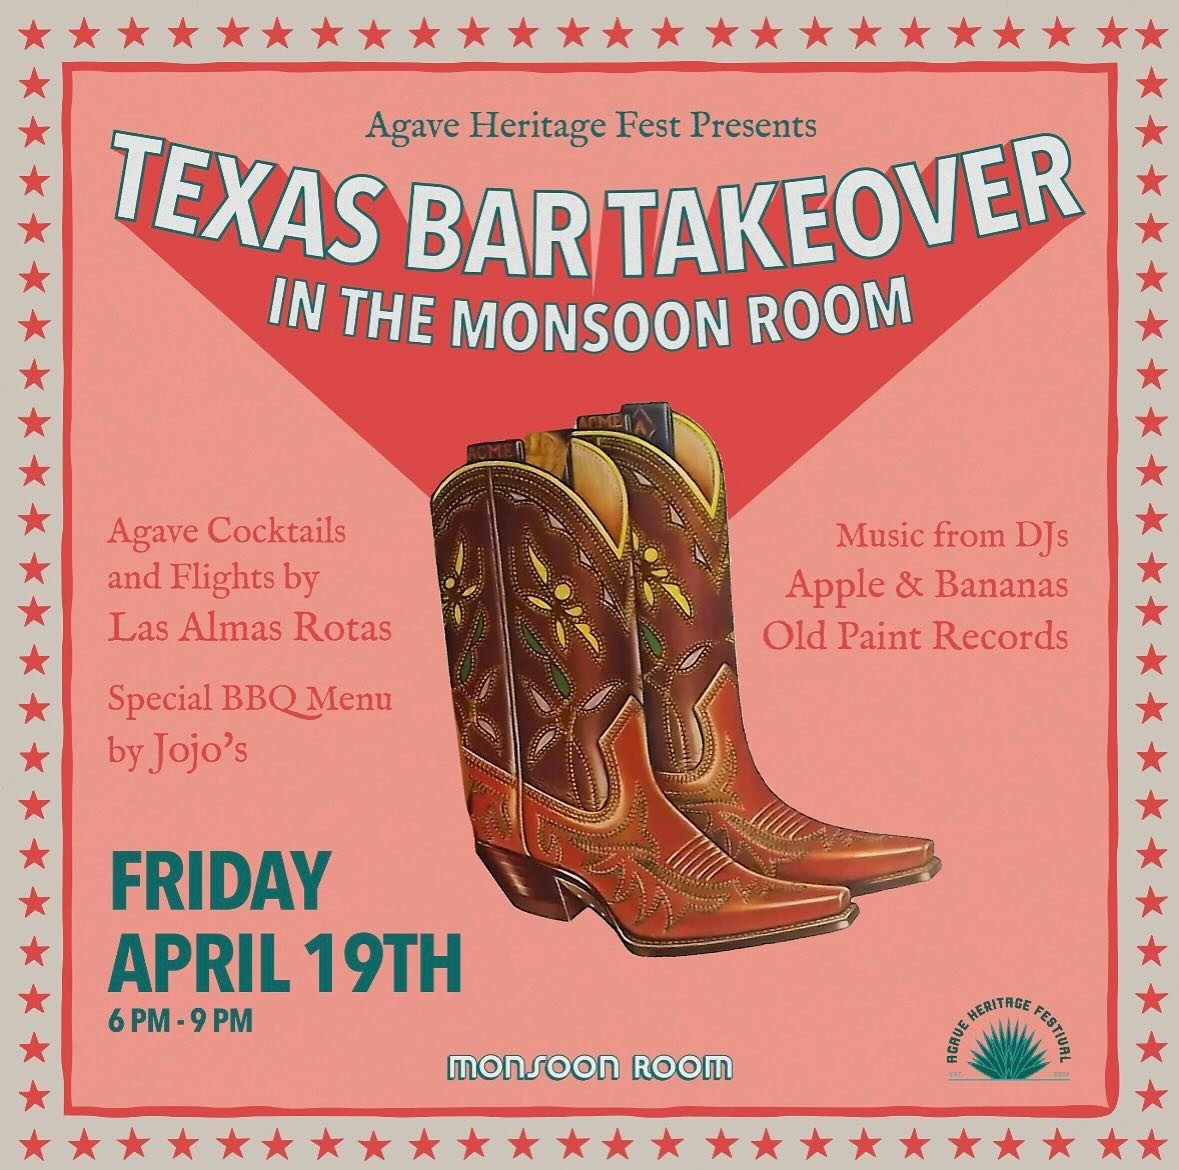 Don&rsquo;t miss out! Texas bar takeover in the Monsoon Room Friday April 19th 6-9pm! Drink specials and food from @jojostucson!